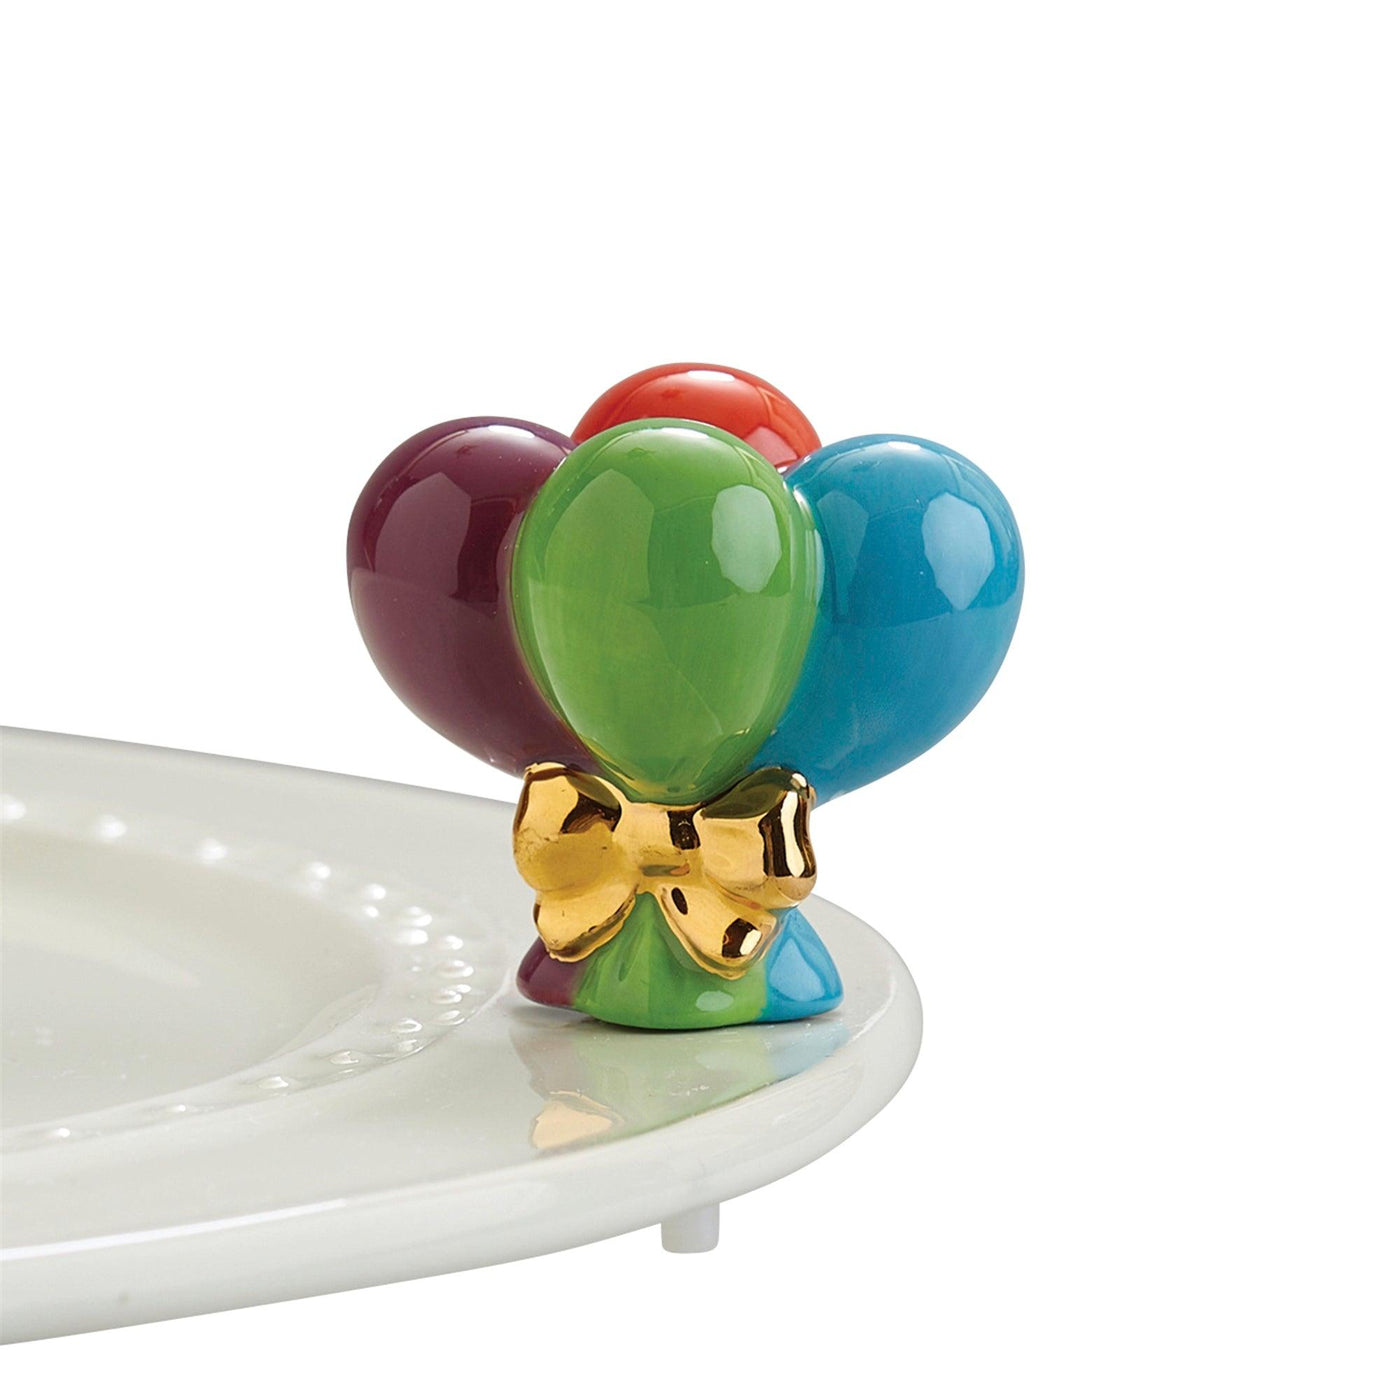 Red, purple, green, and blue ballon tied together with a gold bow mini for a Nora Fleming dish